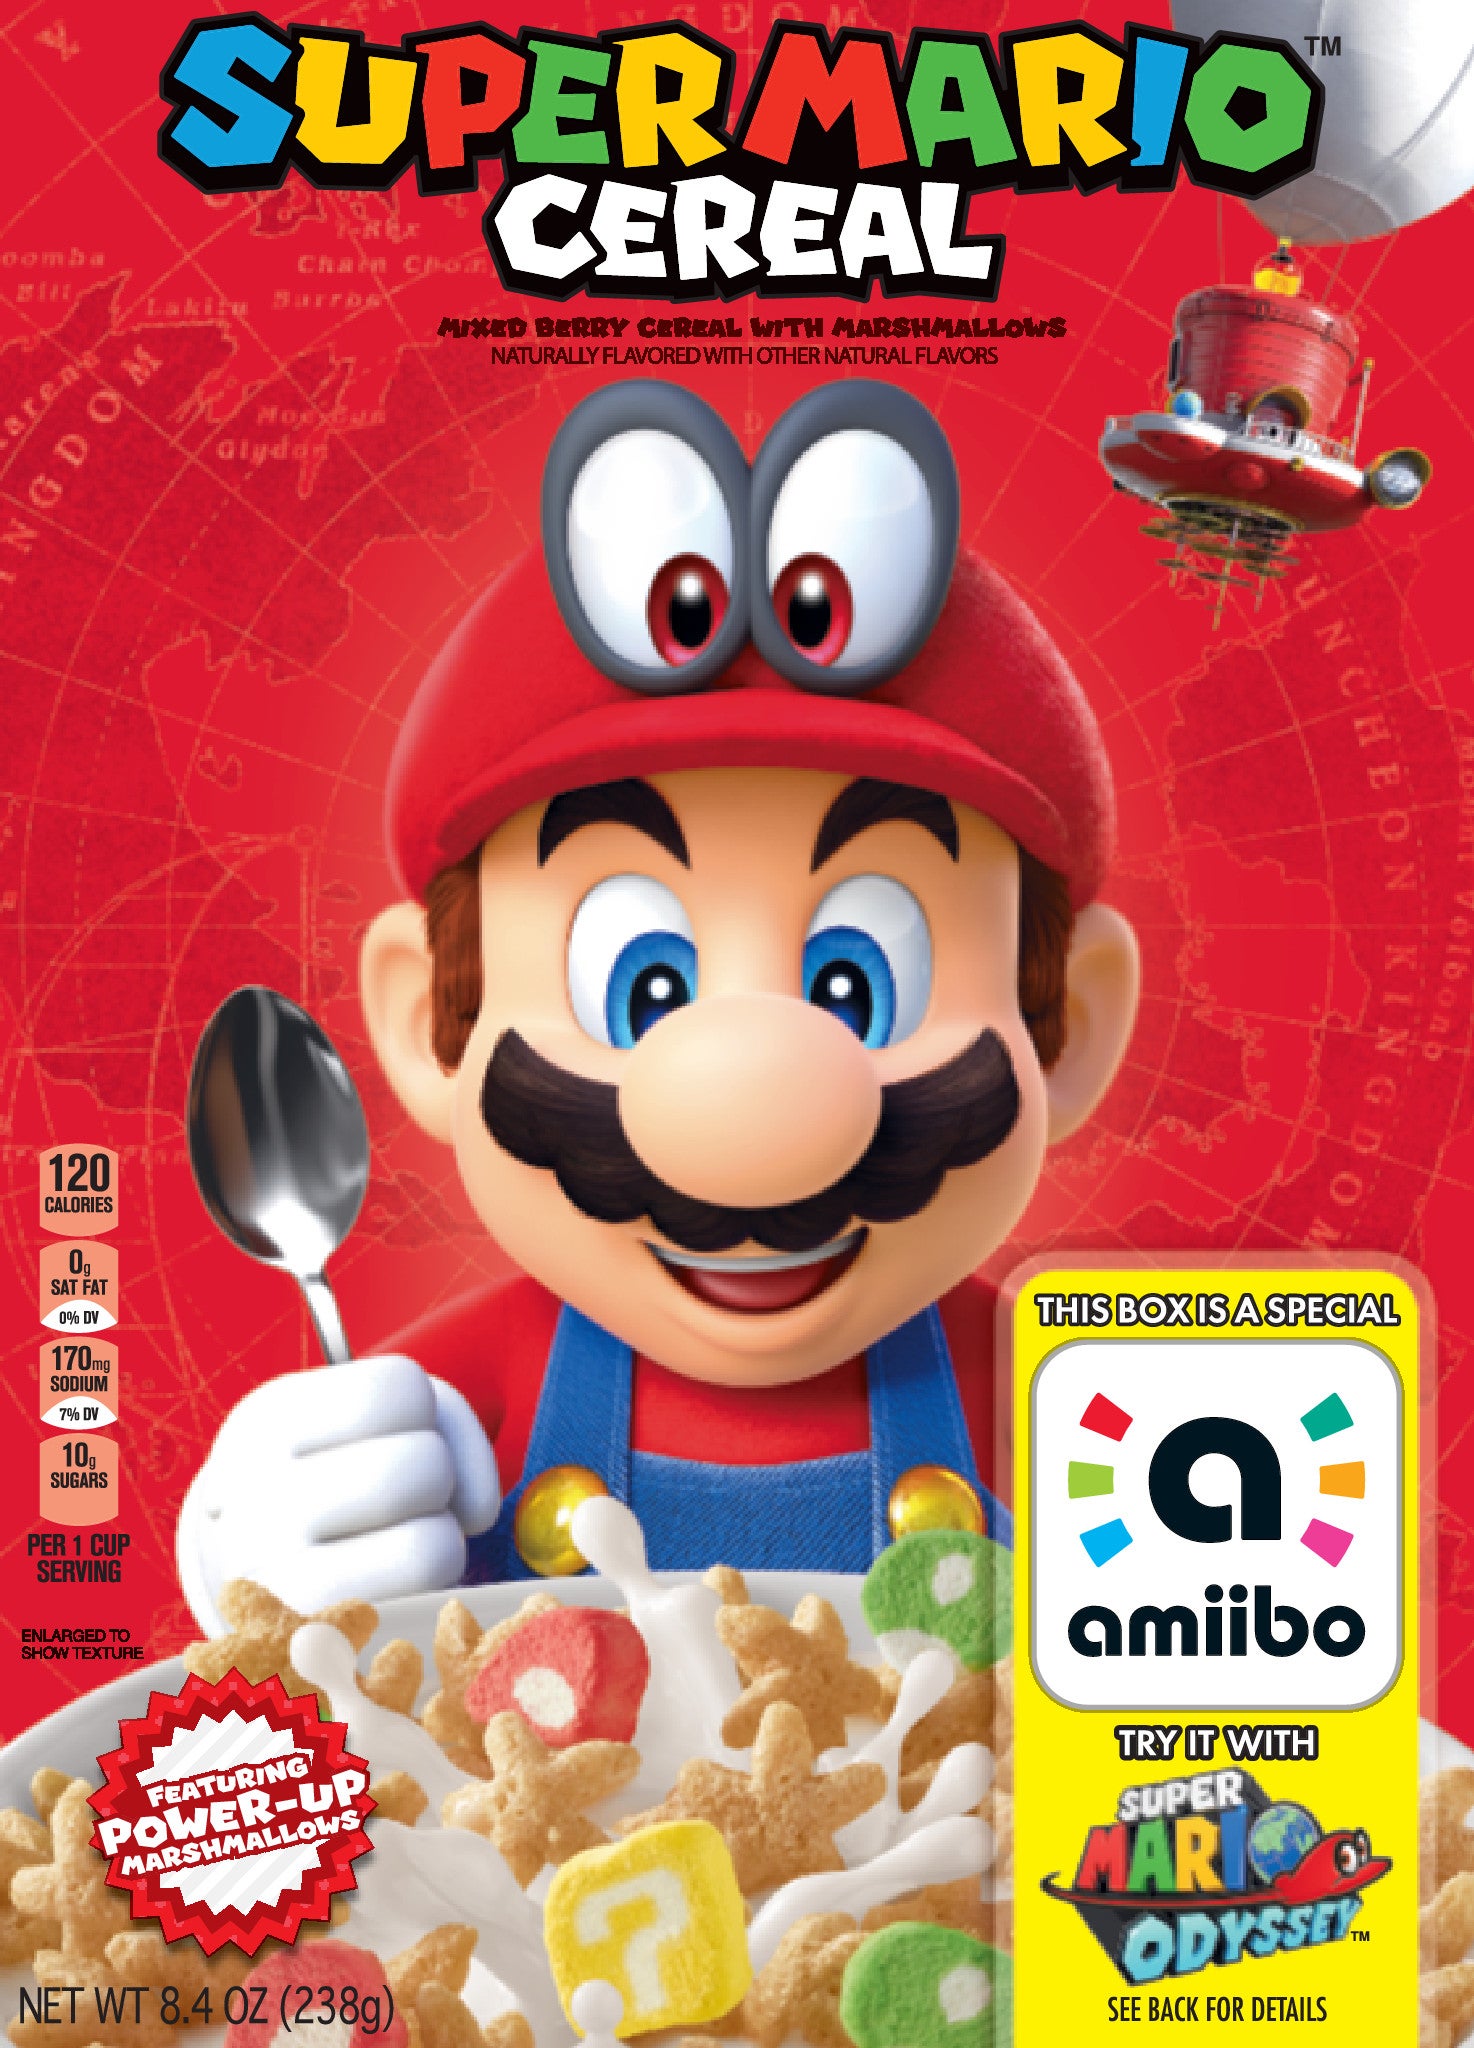 Image for Yes, Super Mario Cereal is a thing and the box functions as an amiibo